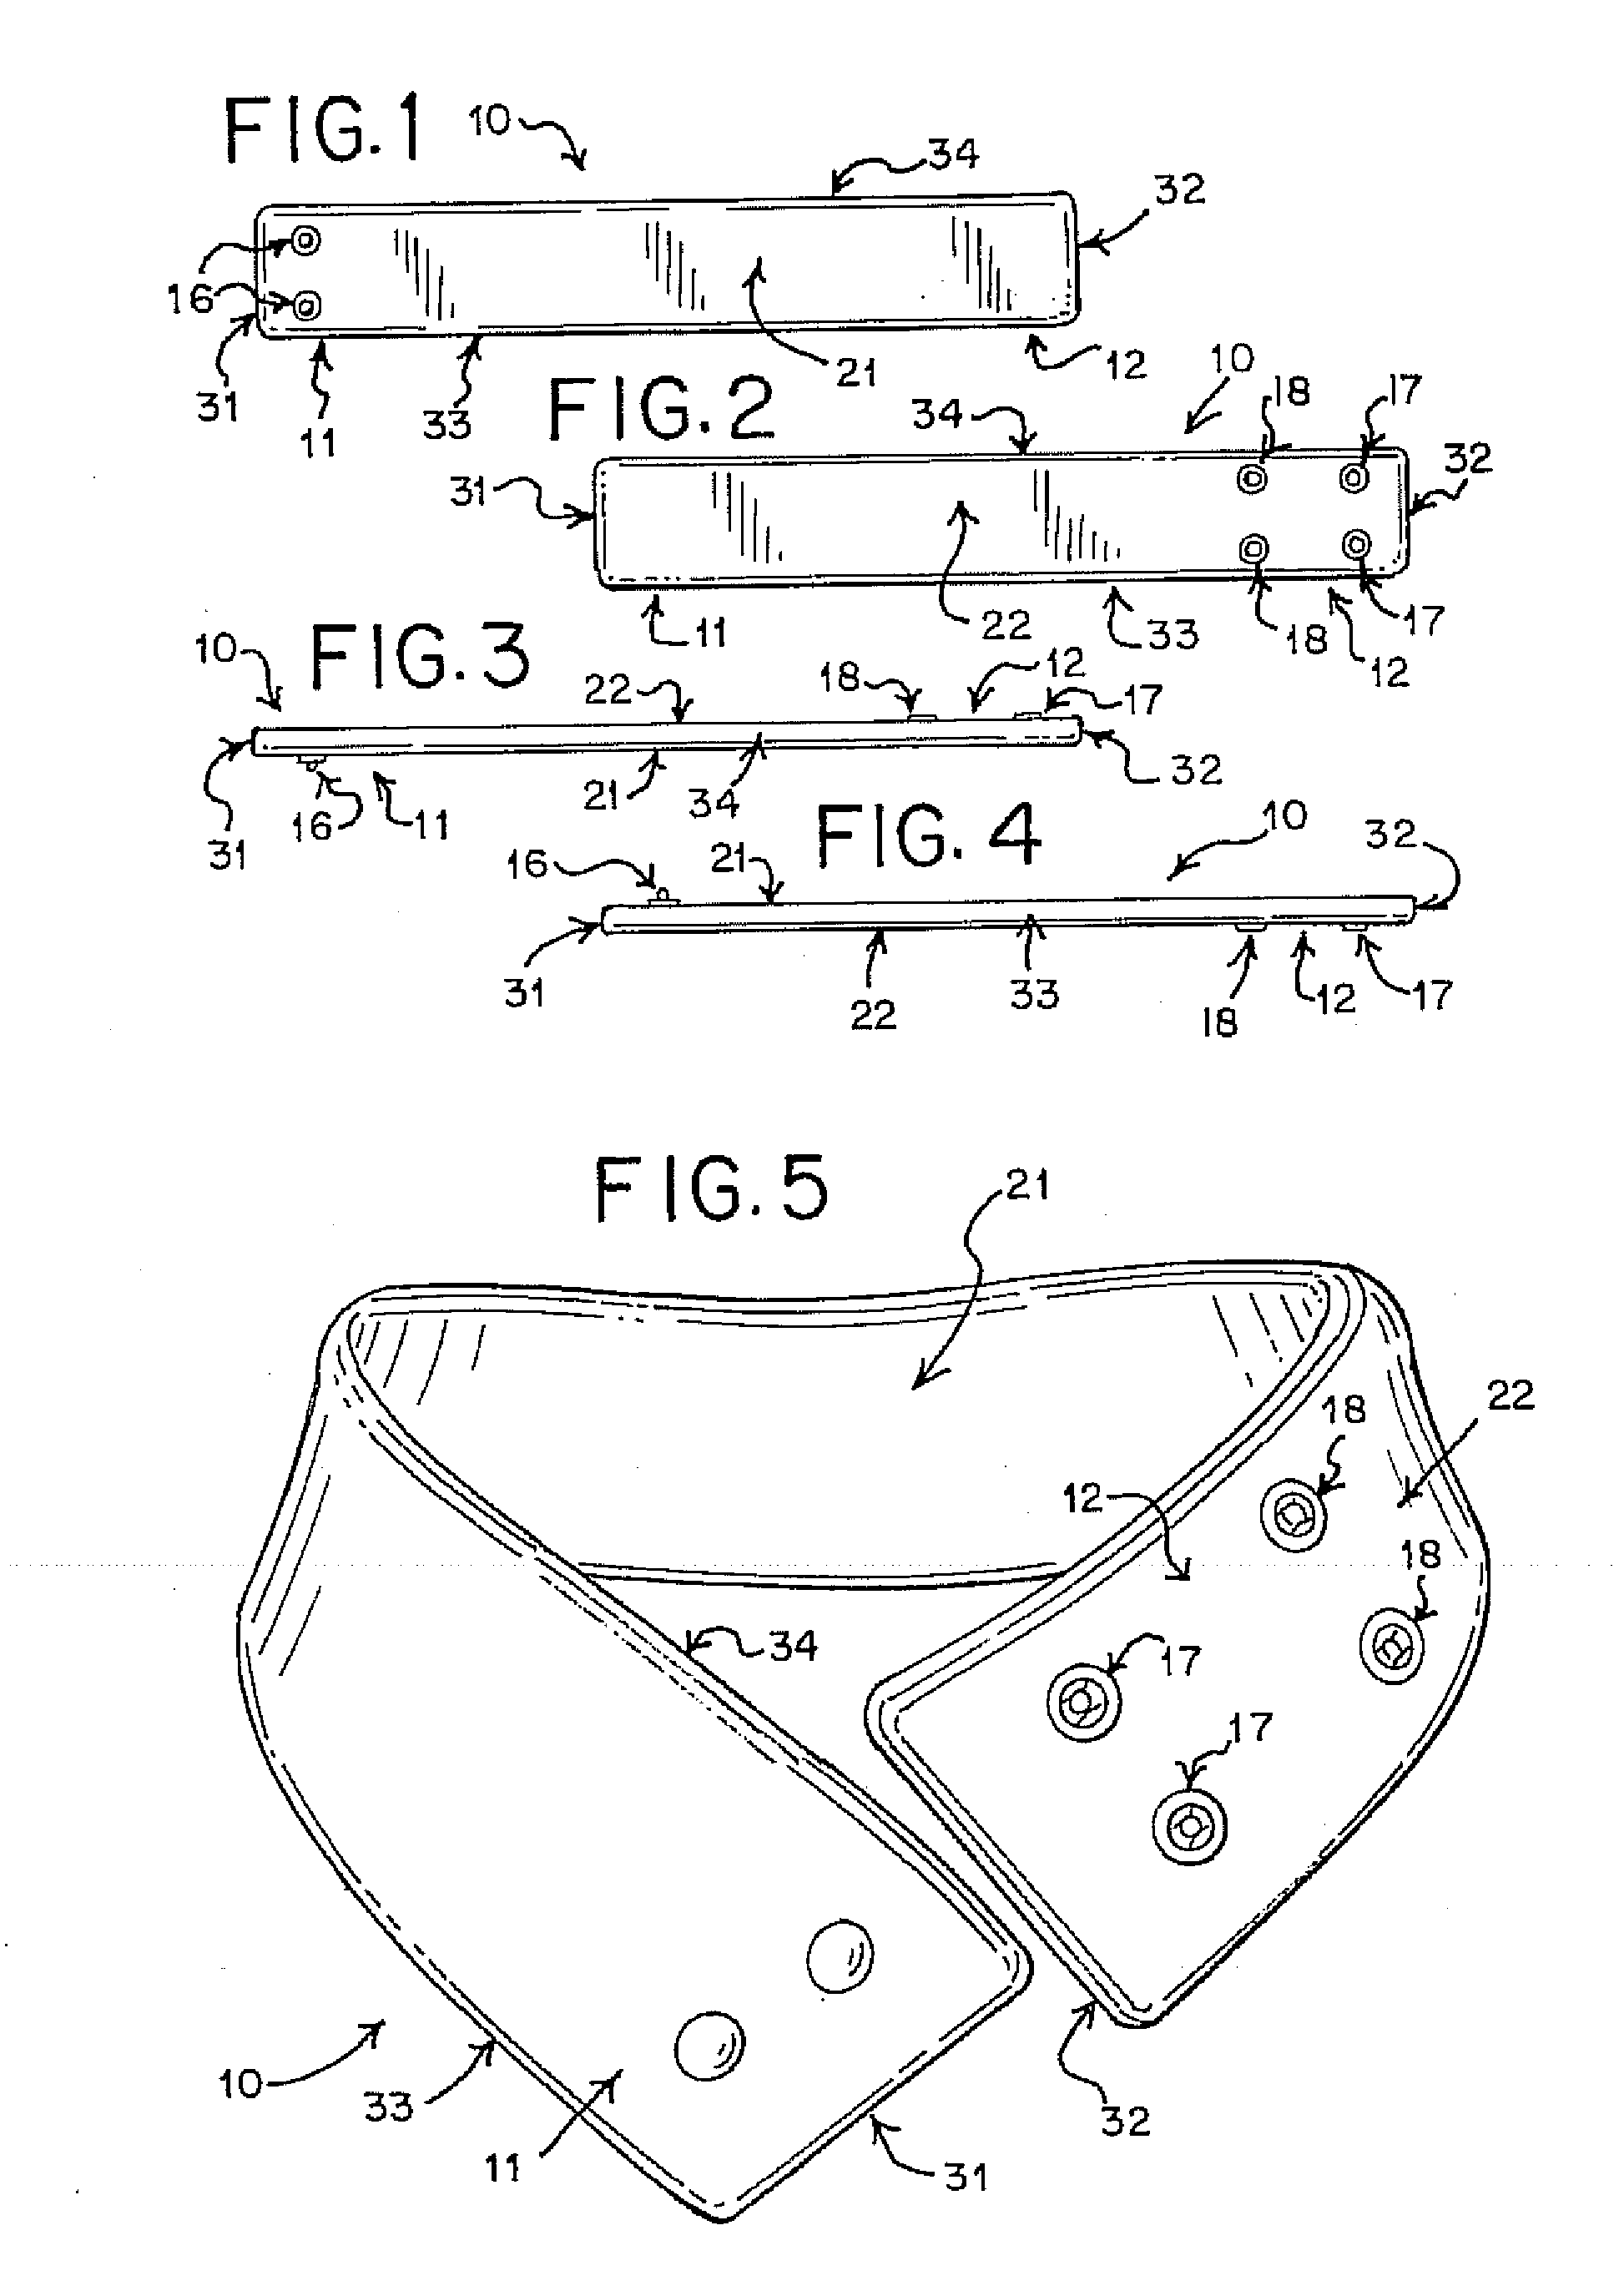 Cough suppressant garment and system and method for suppressing coughing